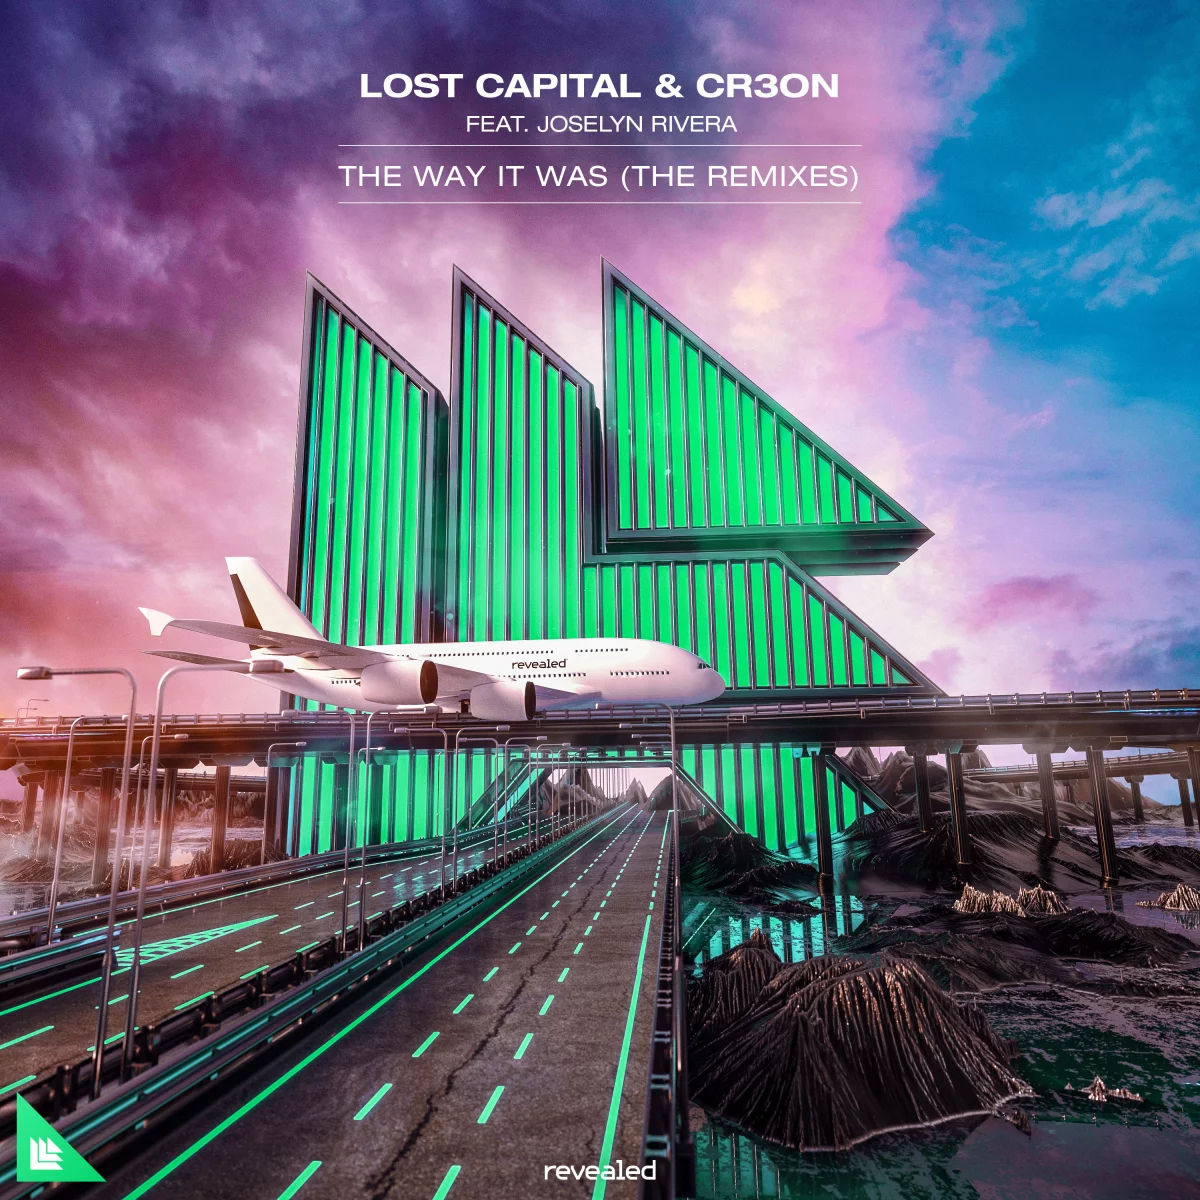 The Way It Was (The Remixes) - Lost Capital⁠ & Cr3on⁠ ⁠feat. Joselyn Rivera⁠ 